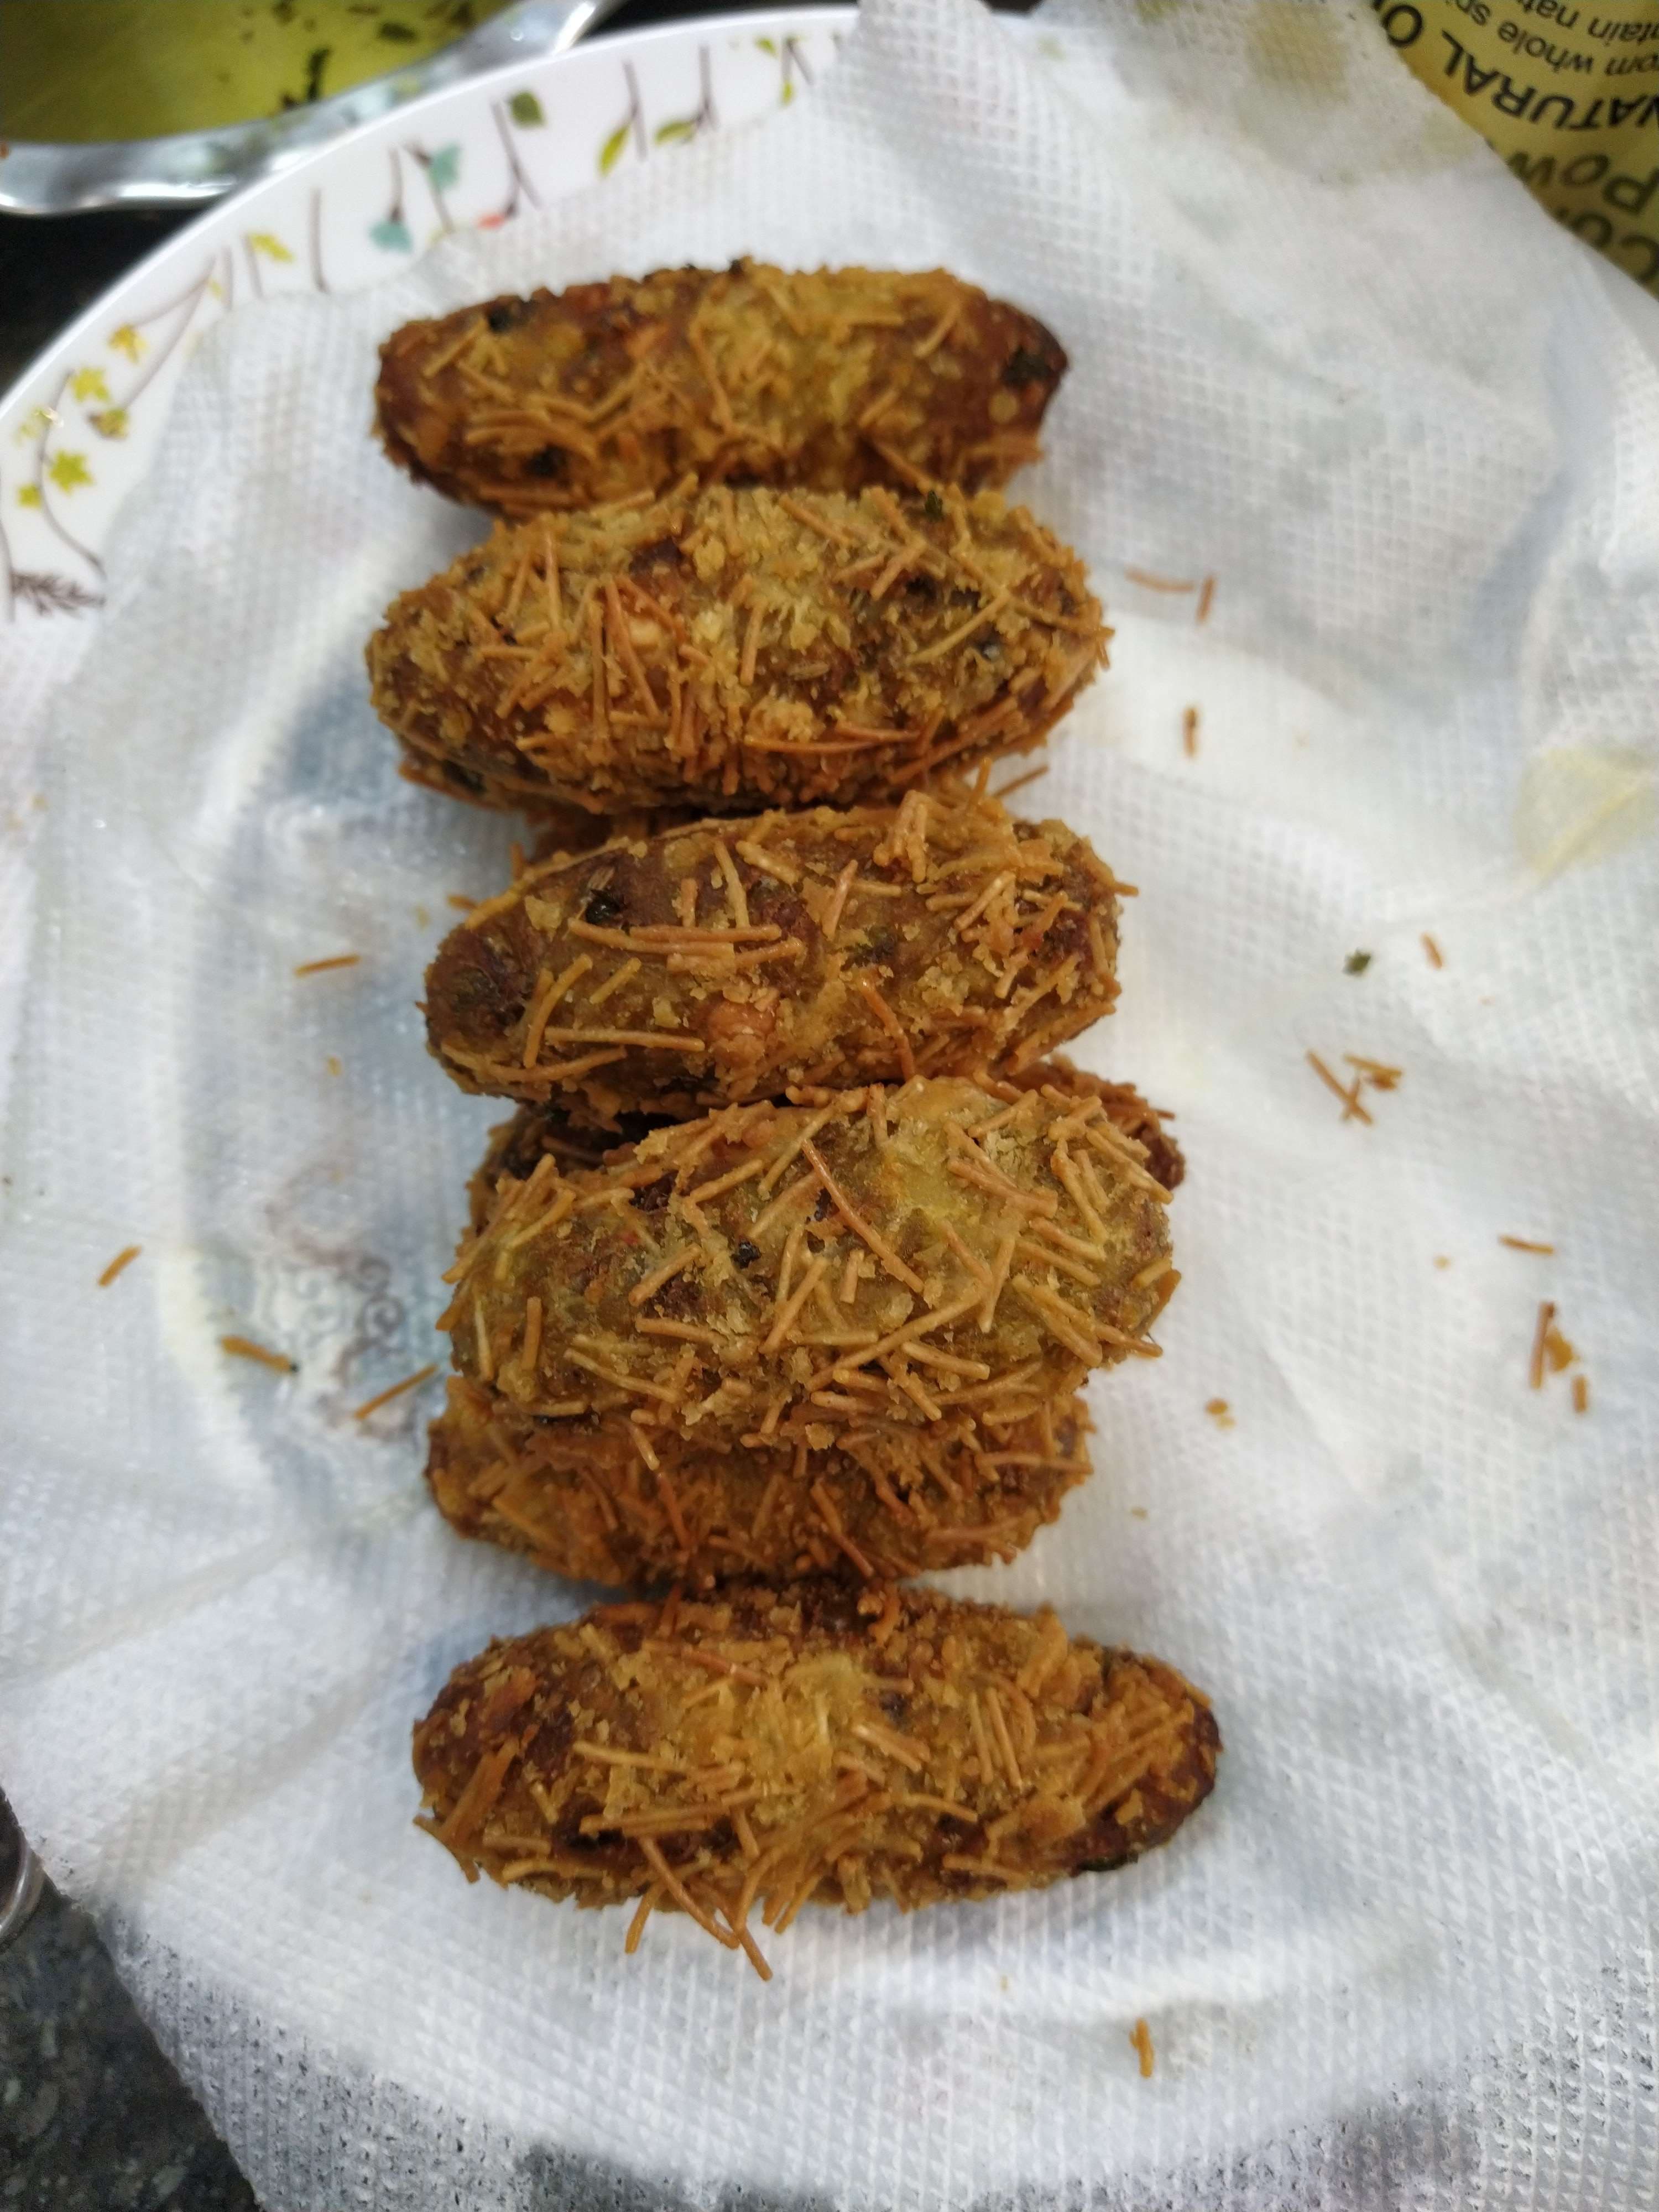 Tasty Veg Cutlets cooked by COOX chefs cooks during occasions parties events at home